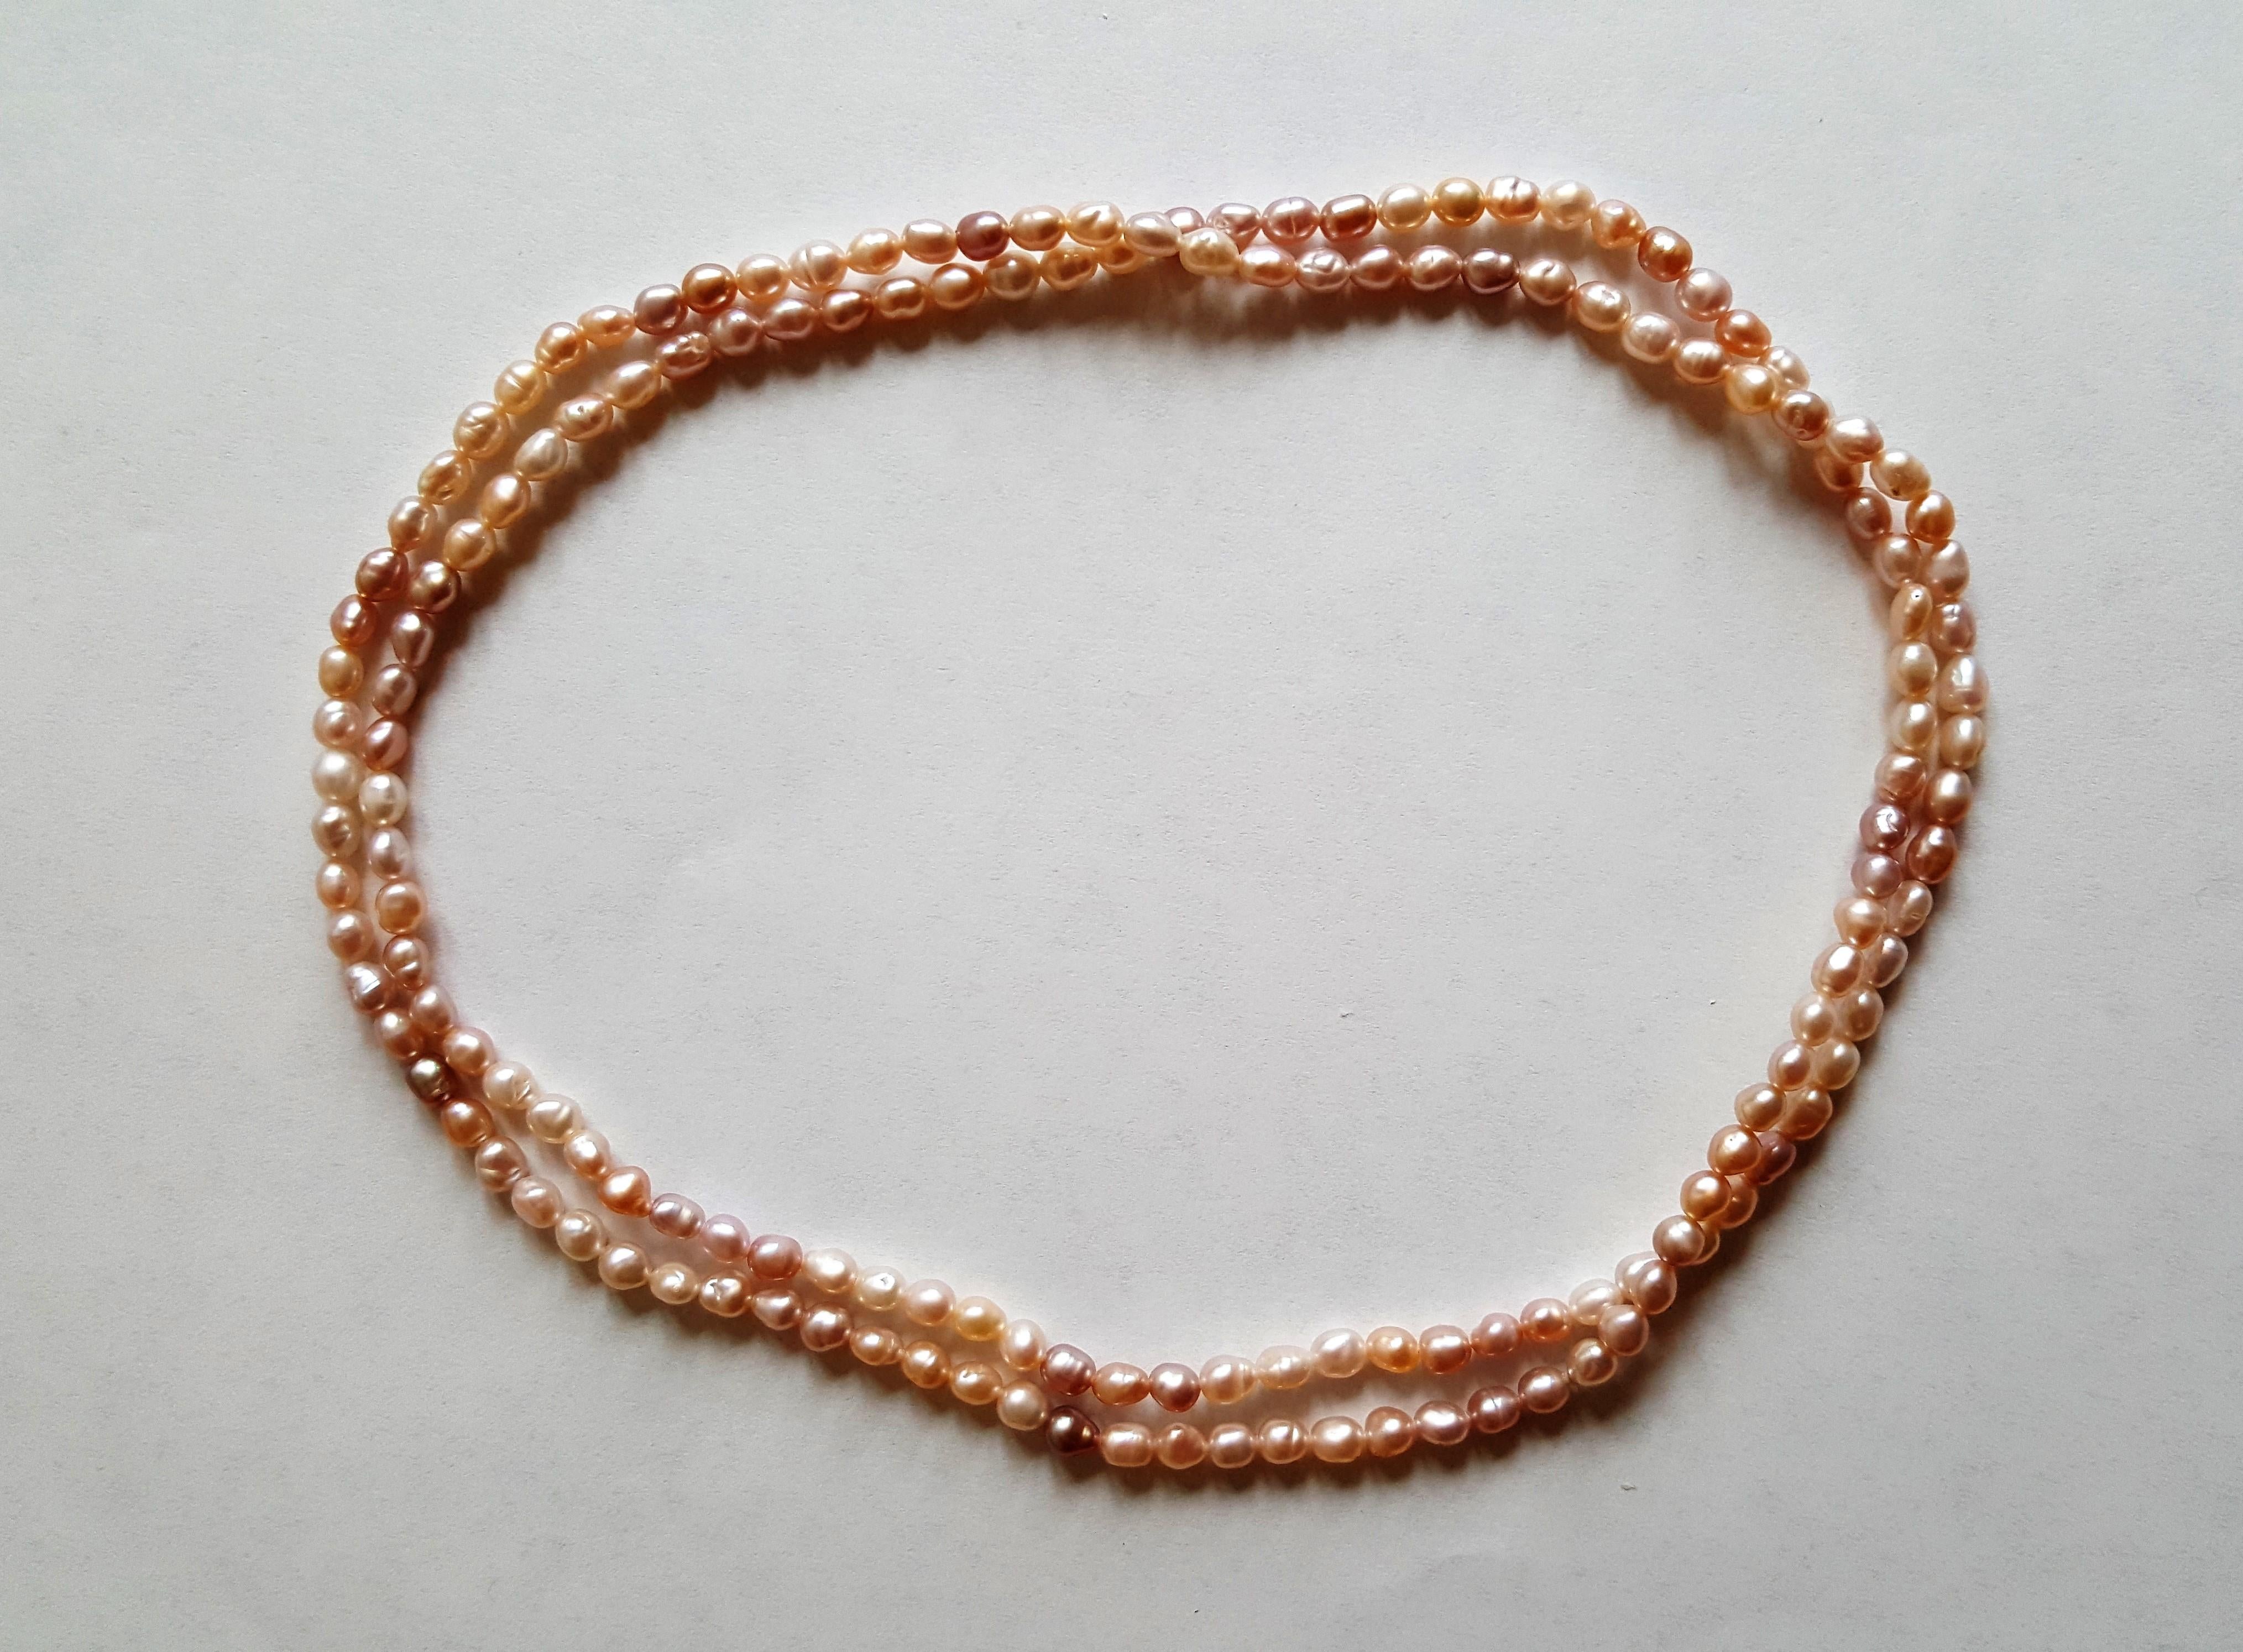 A beautiful strands freshwater pearl stand that's 31 inches in length with shades of pink peach that have a very good luster and nacre. The pearls are  4.2mm in diameter.

These pearls make a beautiful double strand and classic and timeless addition